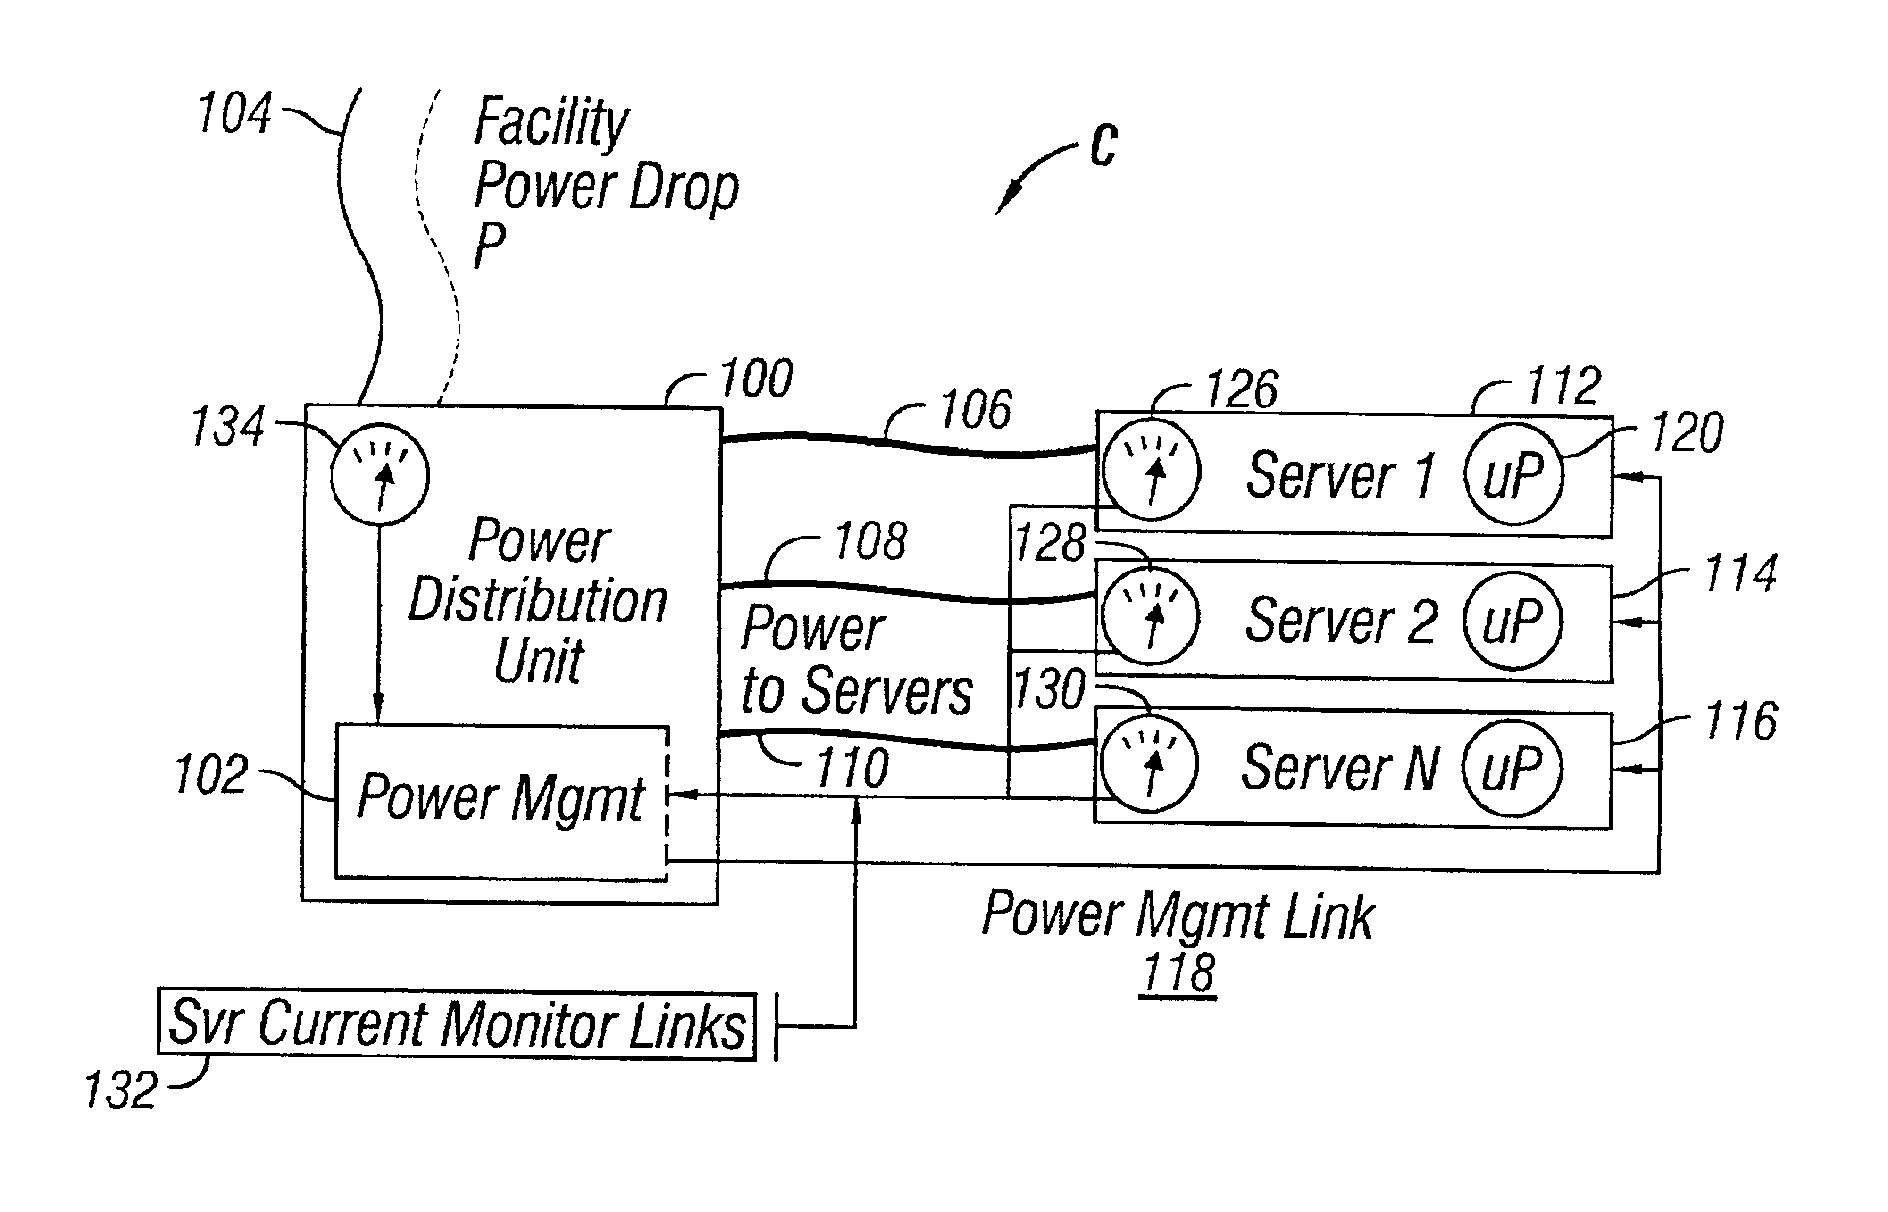 Progressive CPU sleep state duty cycle to limit peak power of multiple computers on shared power distribution unit